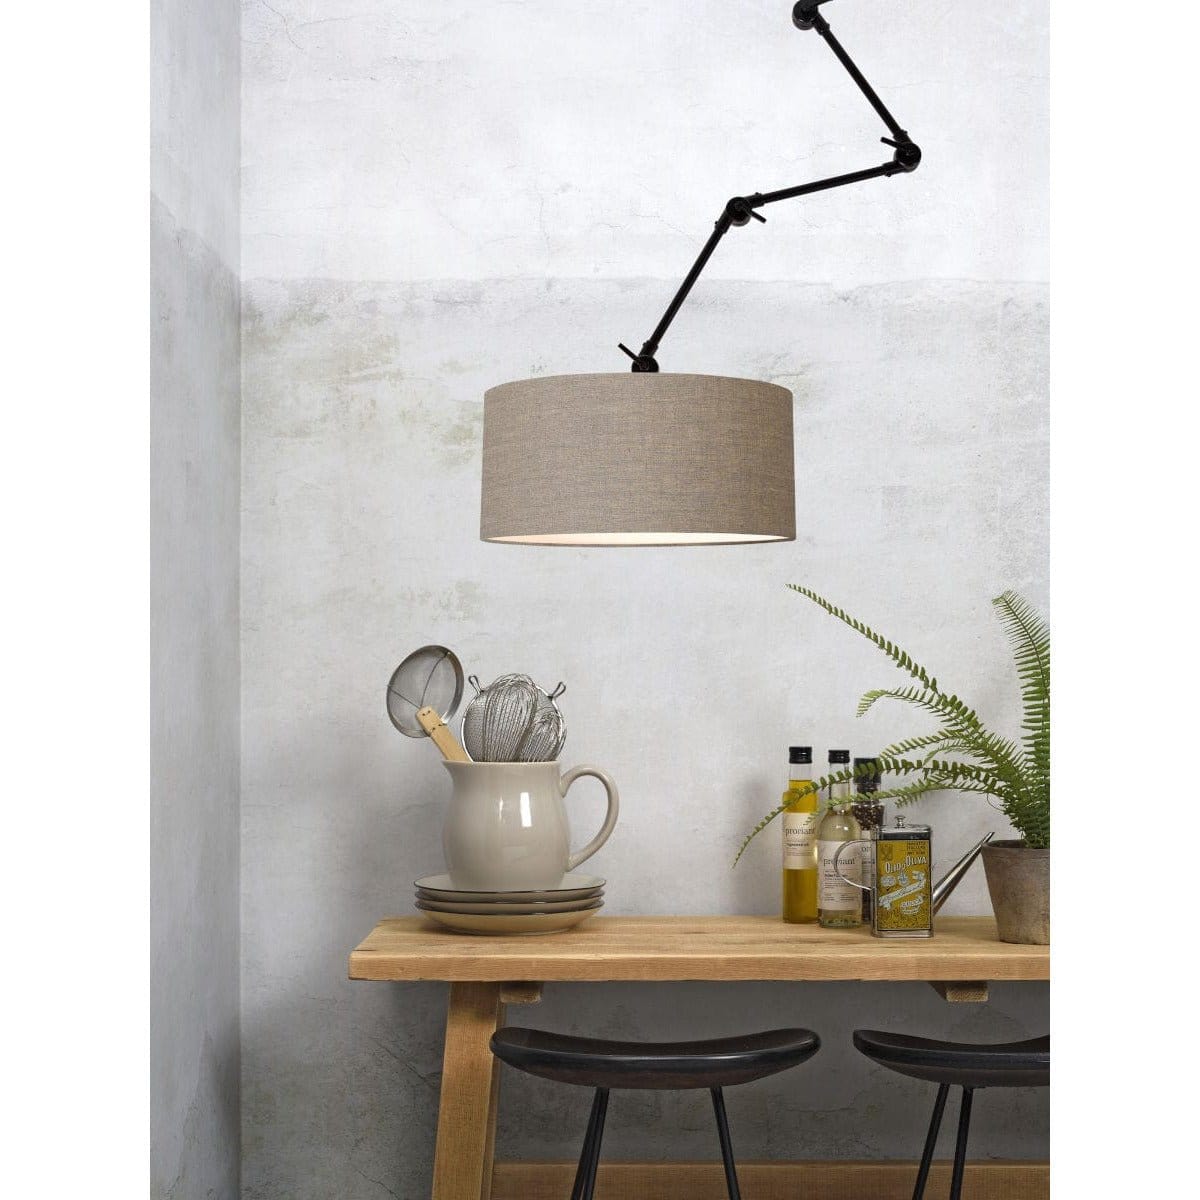 It's About RoMi Wall Lights Amsterdam Wall Light, Large